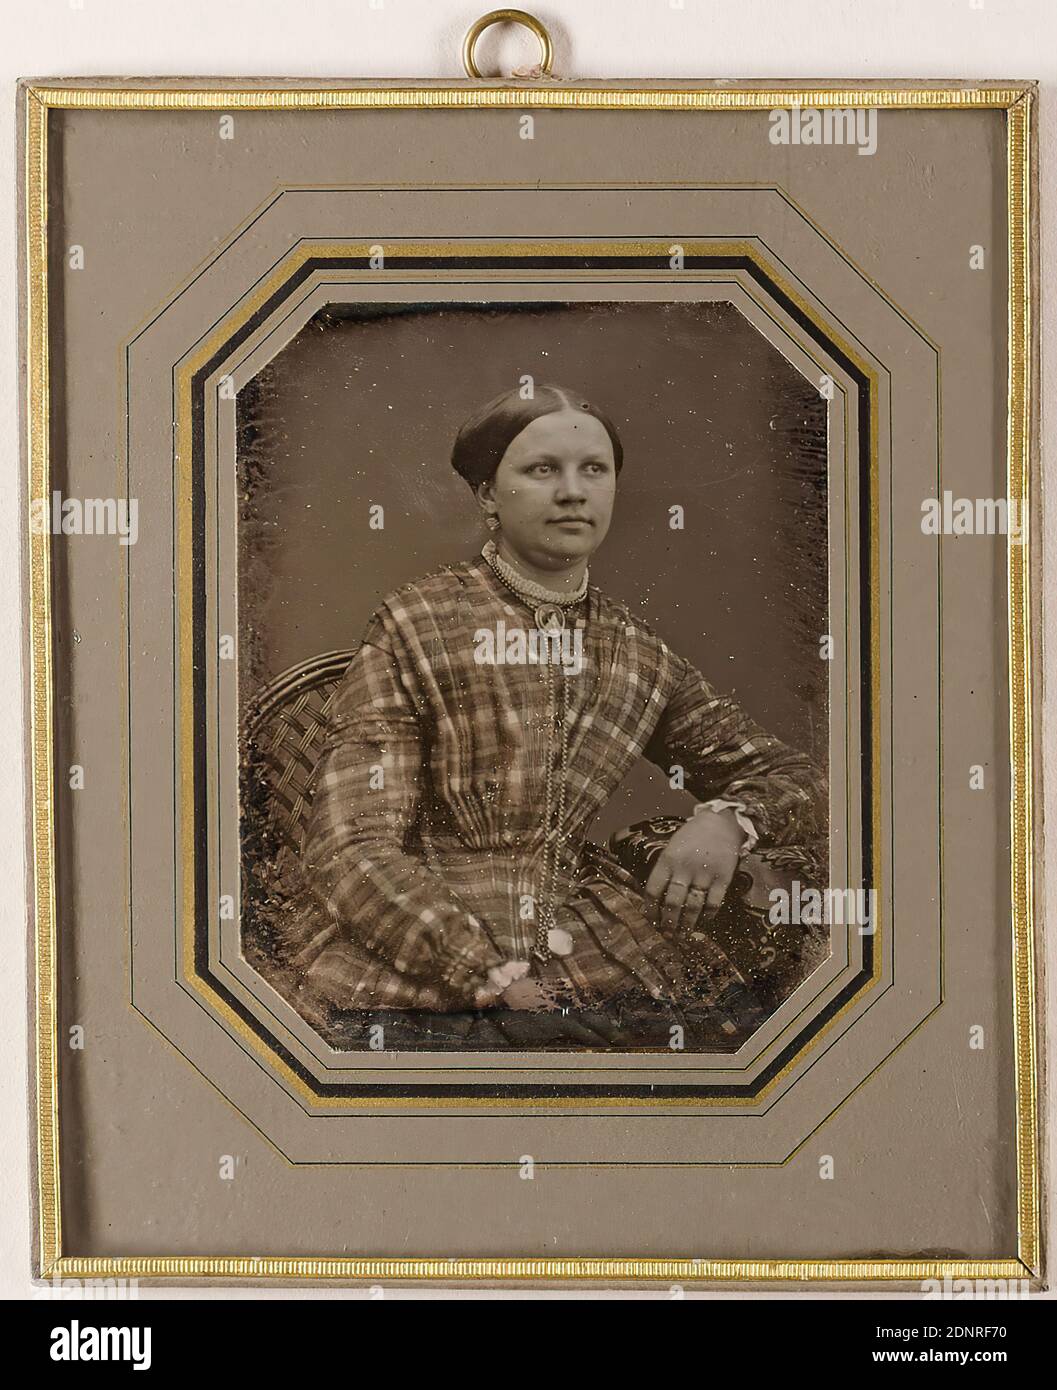 Richard Scholz, portrait of a woman, daguerreotype, picture size : height: 7,80 cm; width: 6,30 cm, inscribed: on the back wall: o. in lead: d. 3.12.12, bought in Dresden, W. W.; below in blue ink: Febr. 1854, photographer: Richard Scholz, Dresden, numbered: verso top left: in black ink on label: D.S. 270, portrait photography, half-length portrait, woman, seated figure Stock Photo